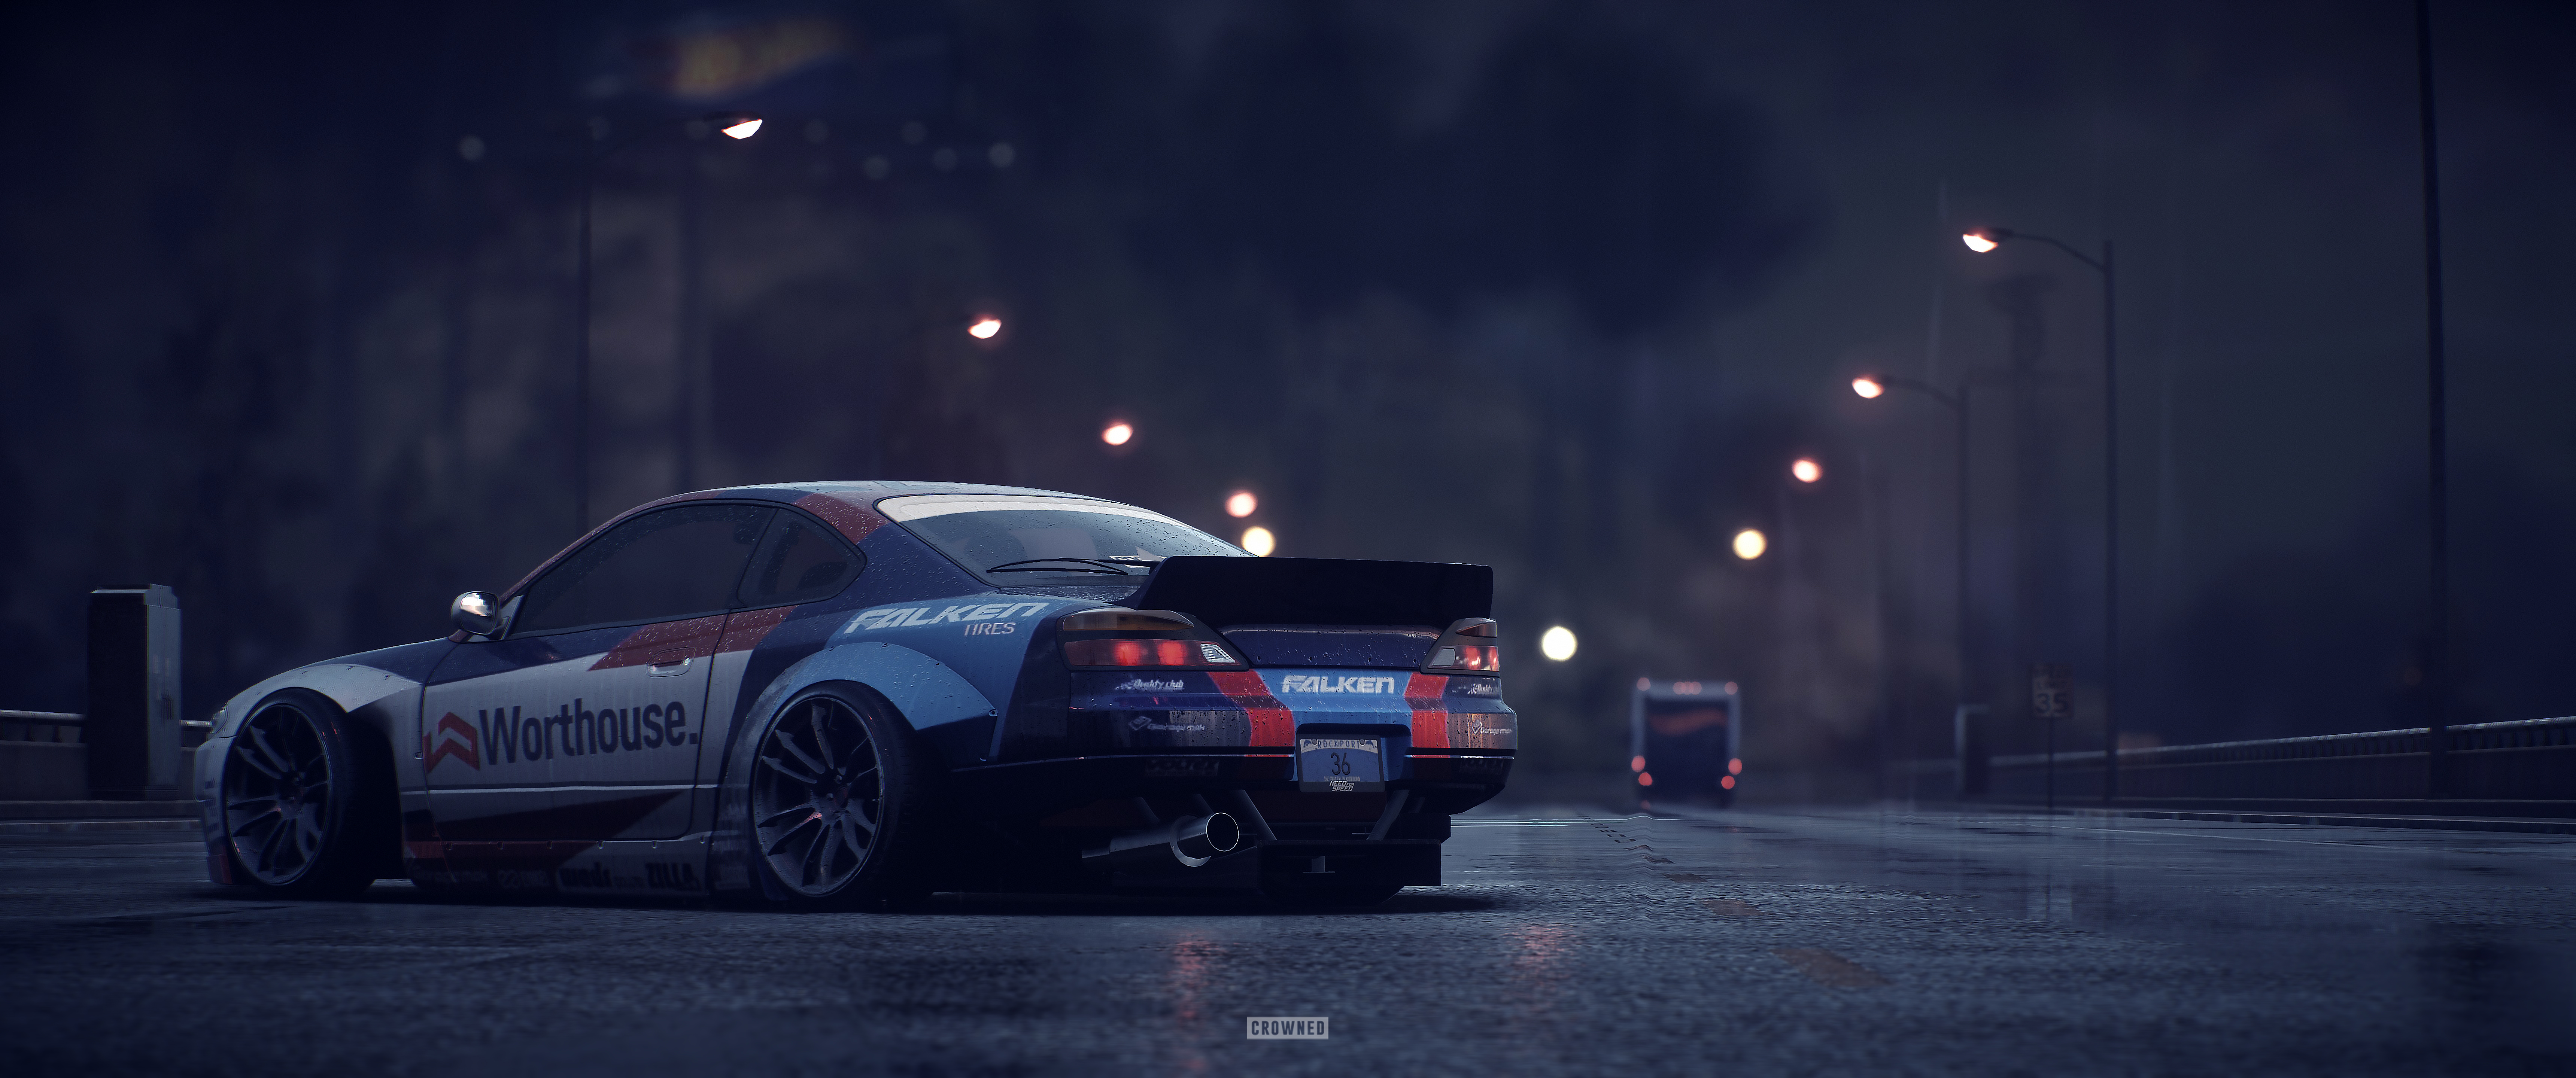 CROWNED Need For Speed Nissan Silvia S15 Car 6880x2880